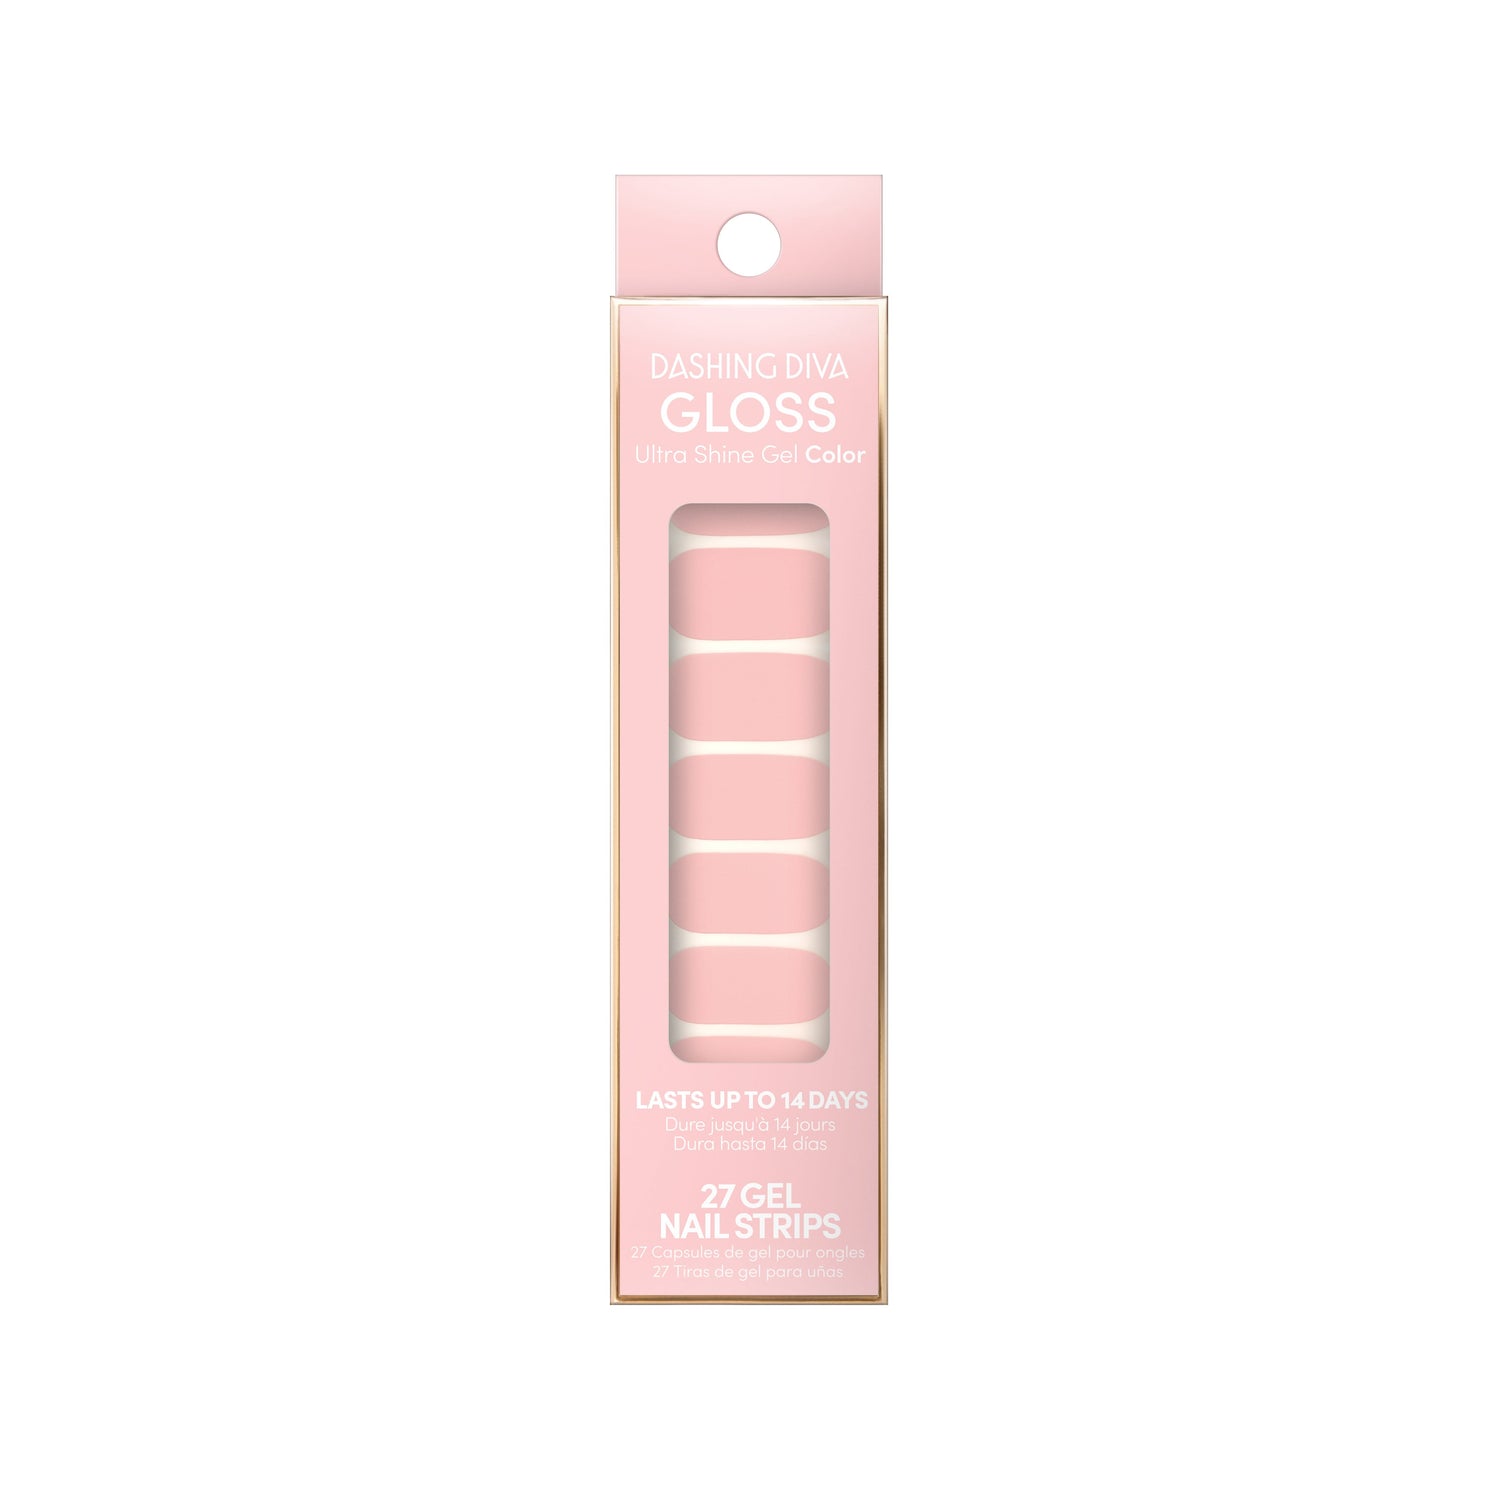 Dashing Diva GLOSS Color classic baby pink gel nail strips.